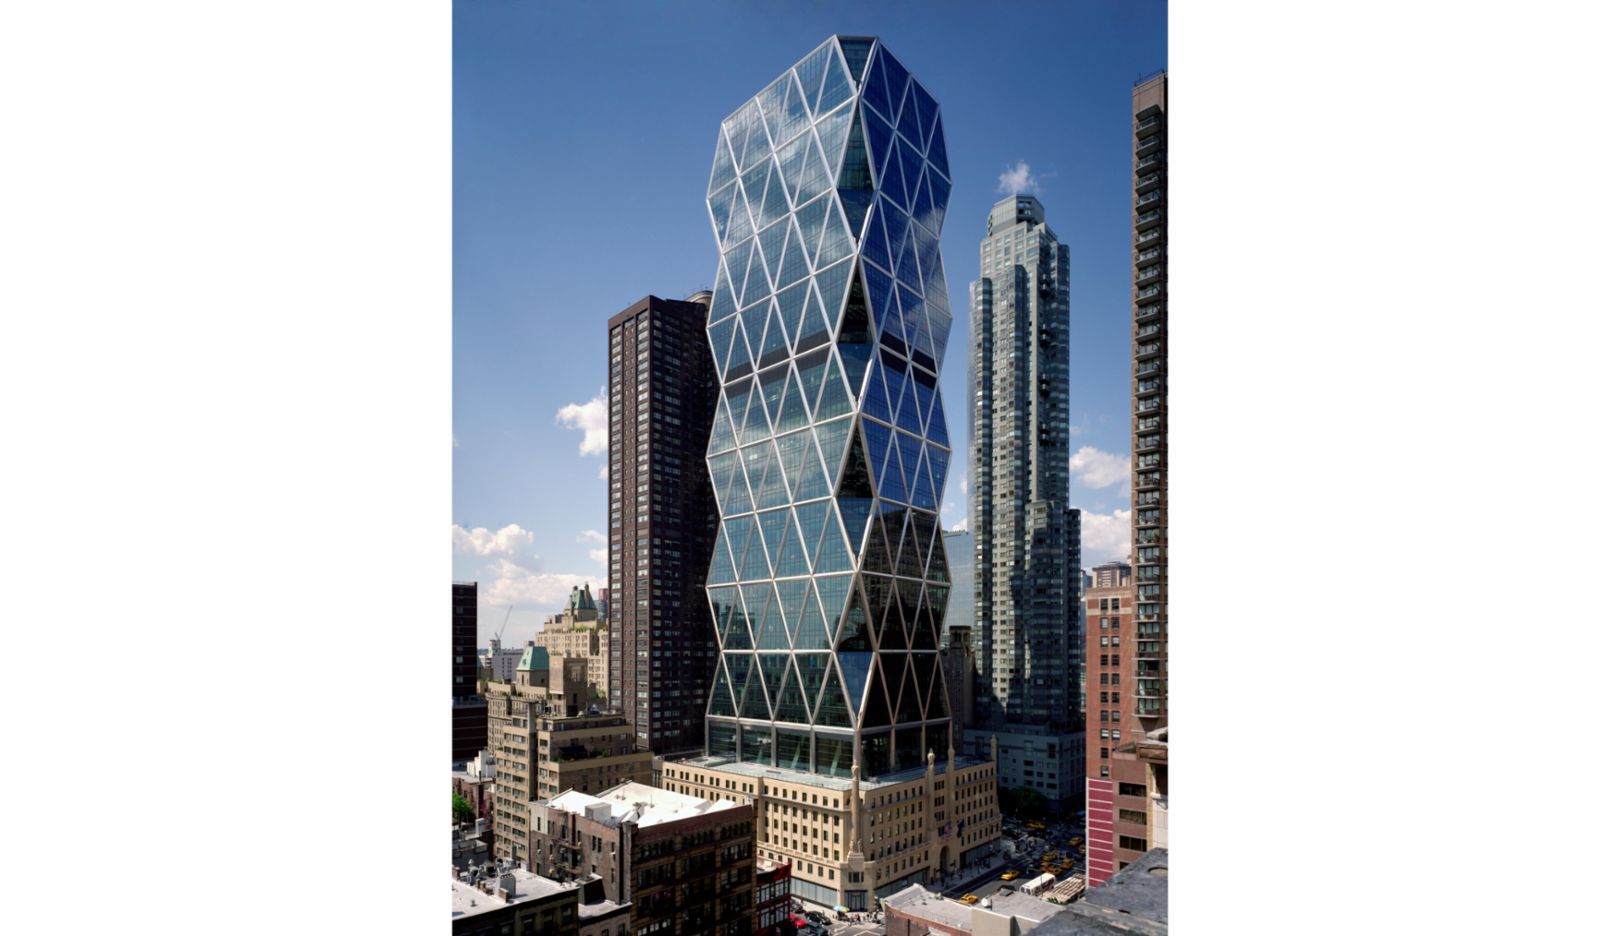 Hearst Tower, south of New York's Central Park, is a model of sustainability.  85 percent of its steel was recycled, and its HVAC system uses 25 percent less energy than traditional office buildings of a similar size. Photo: Chuck Choi / Foster + Partners